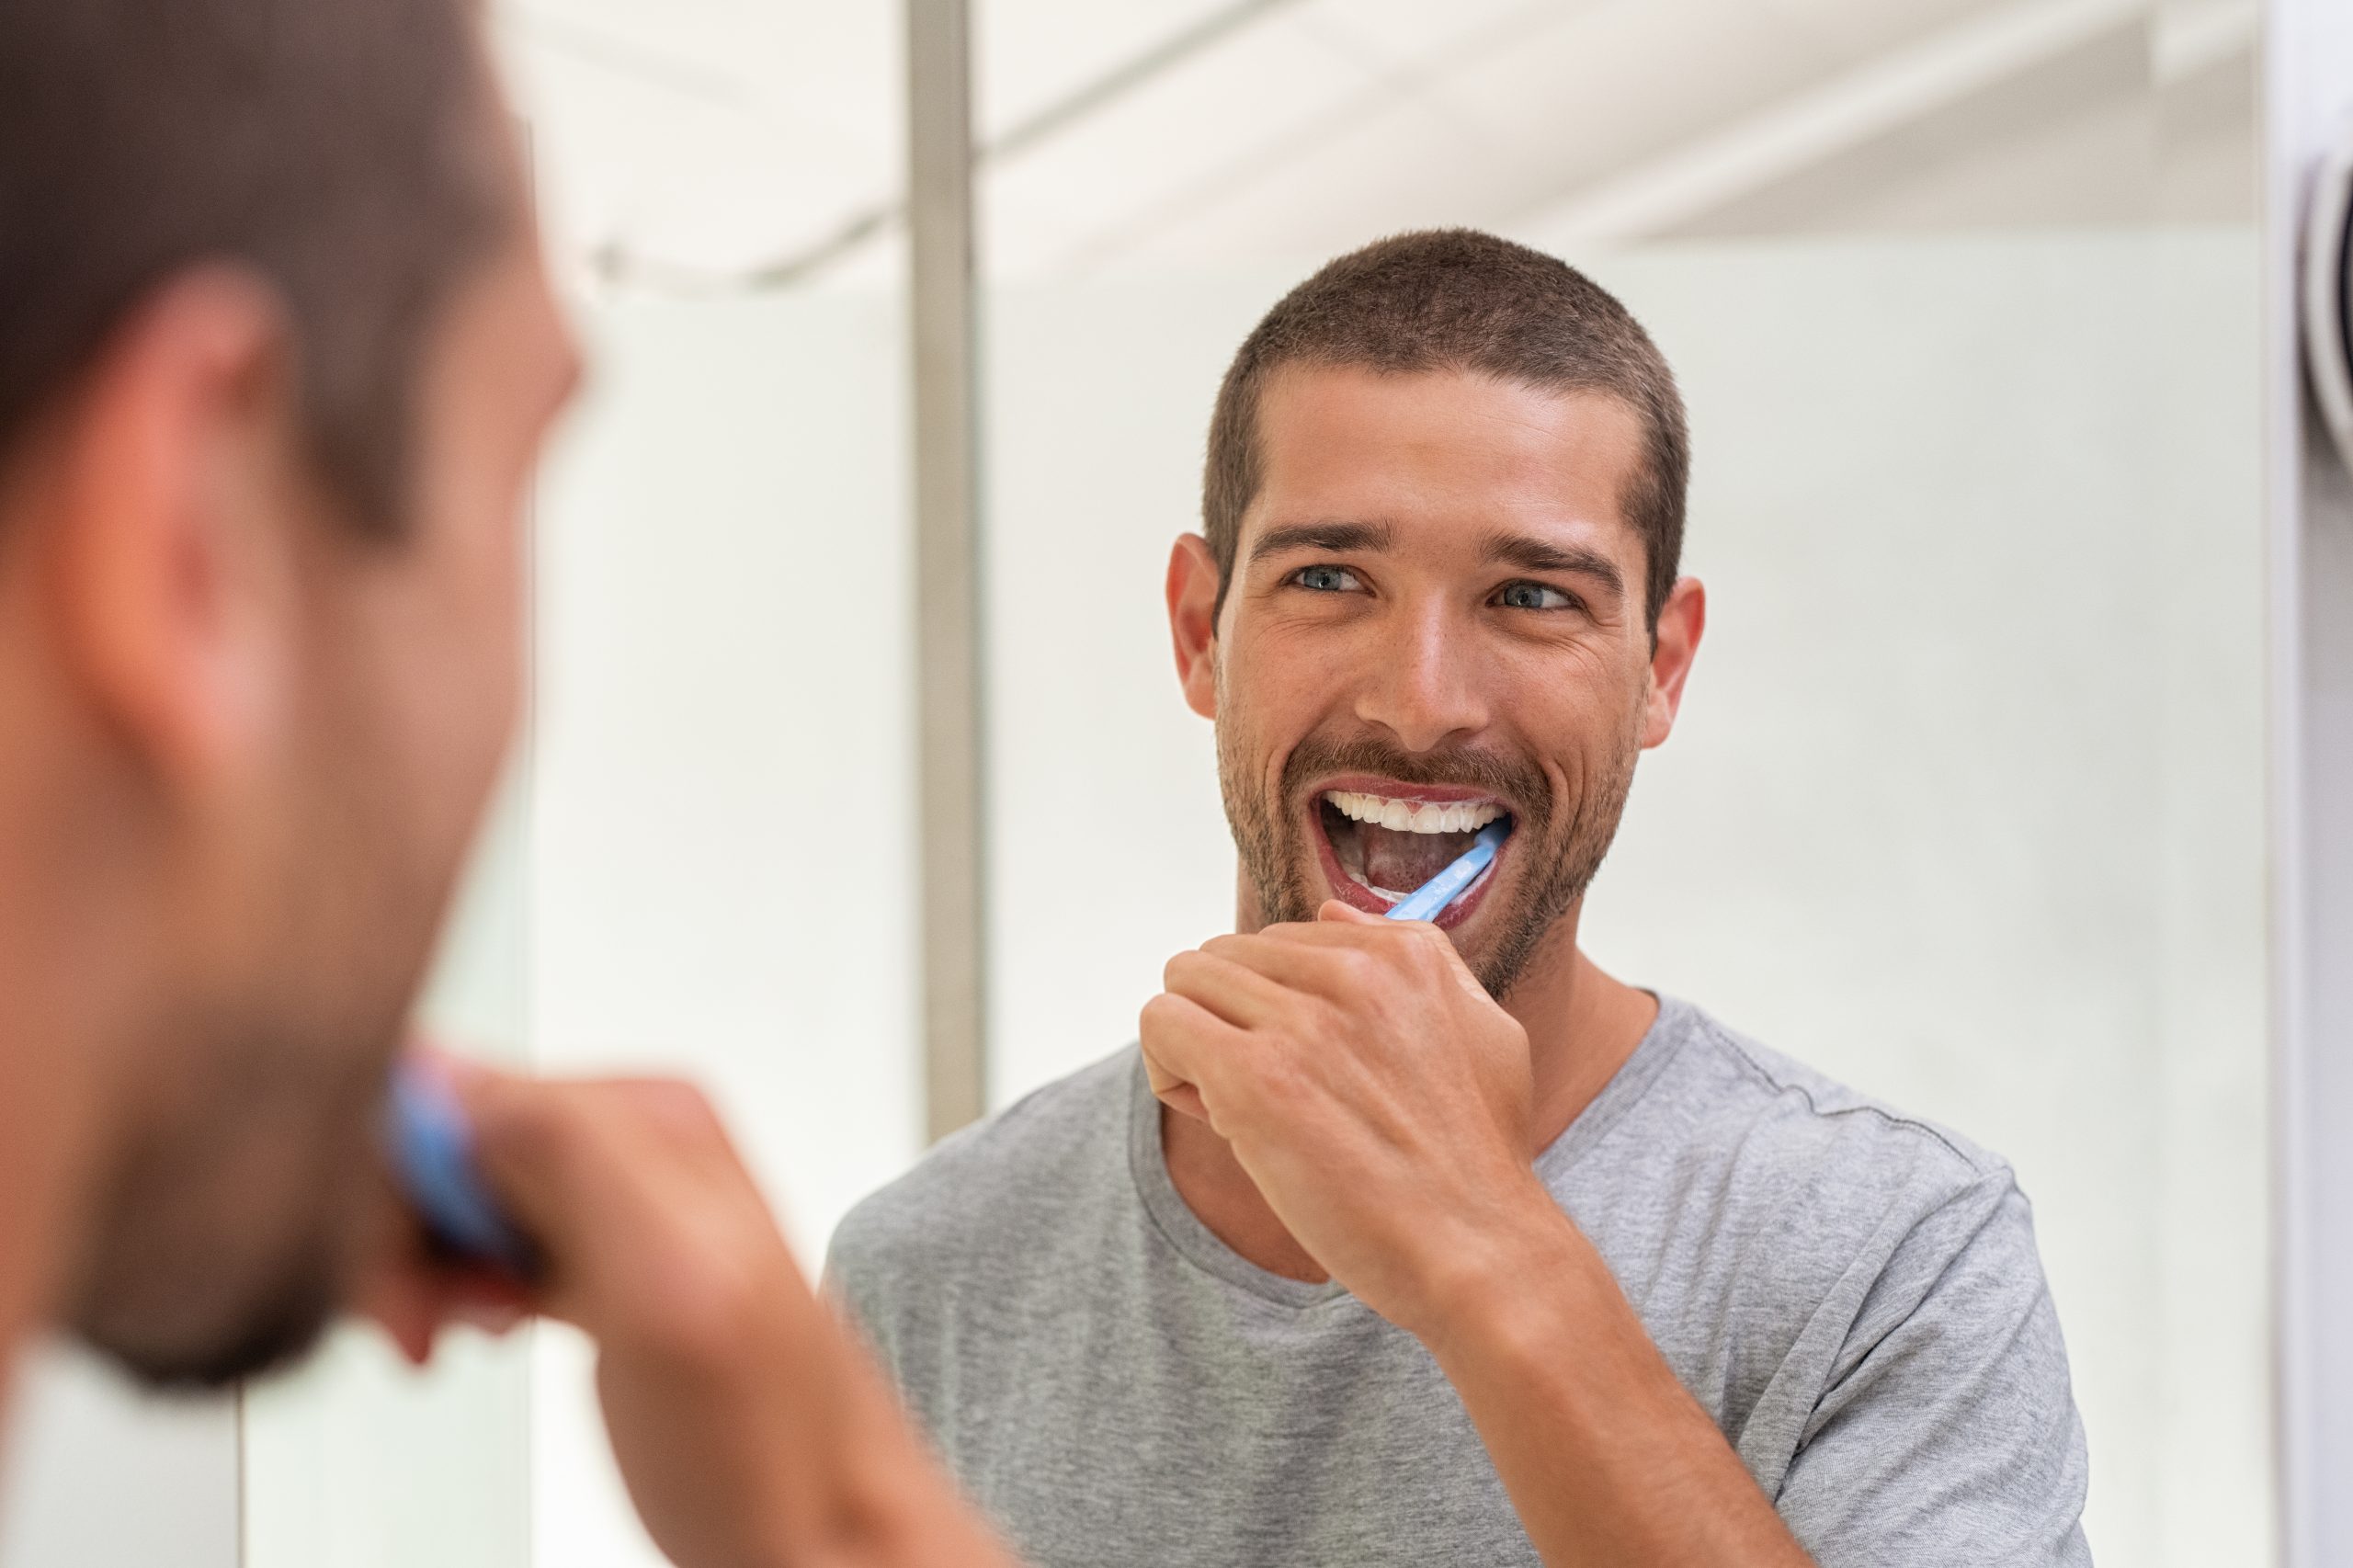 Are You Making This Common Oral Hygiene Mistake?